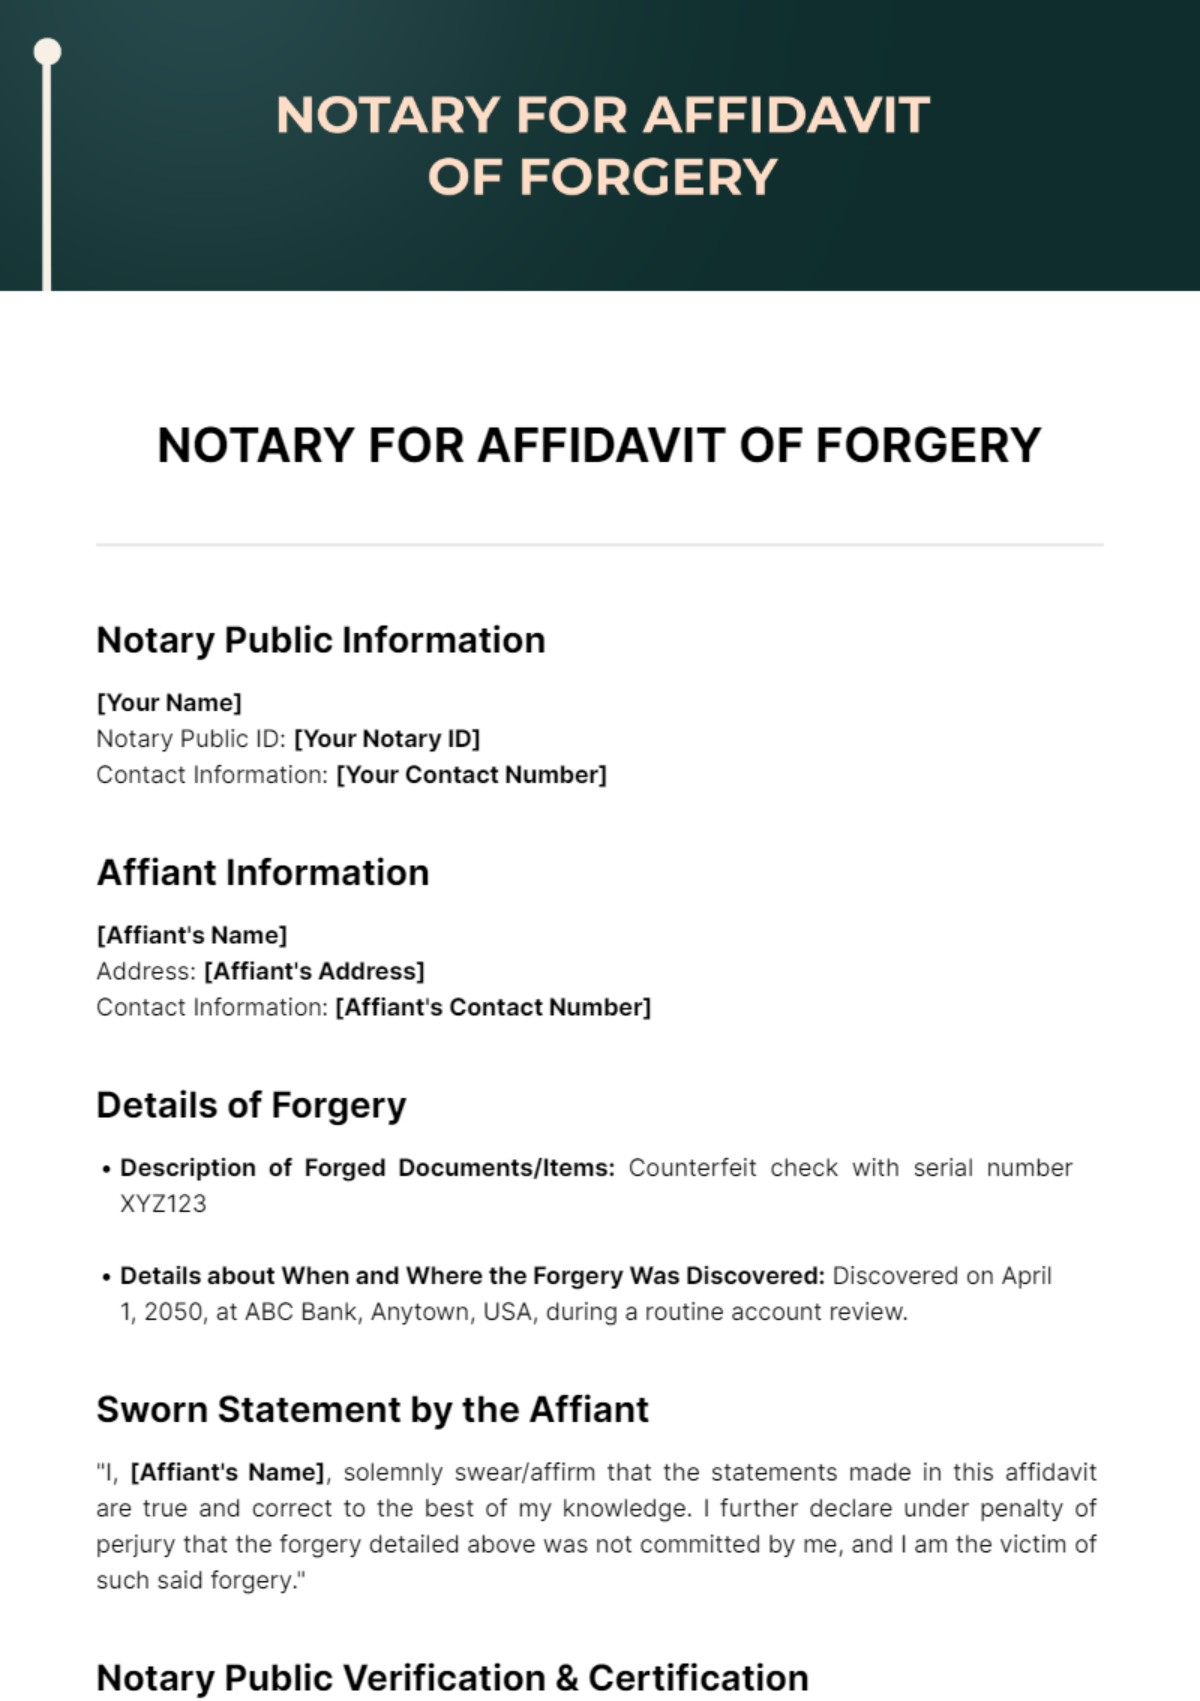 Free Notary For Affidavit Of Forgery Template